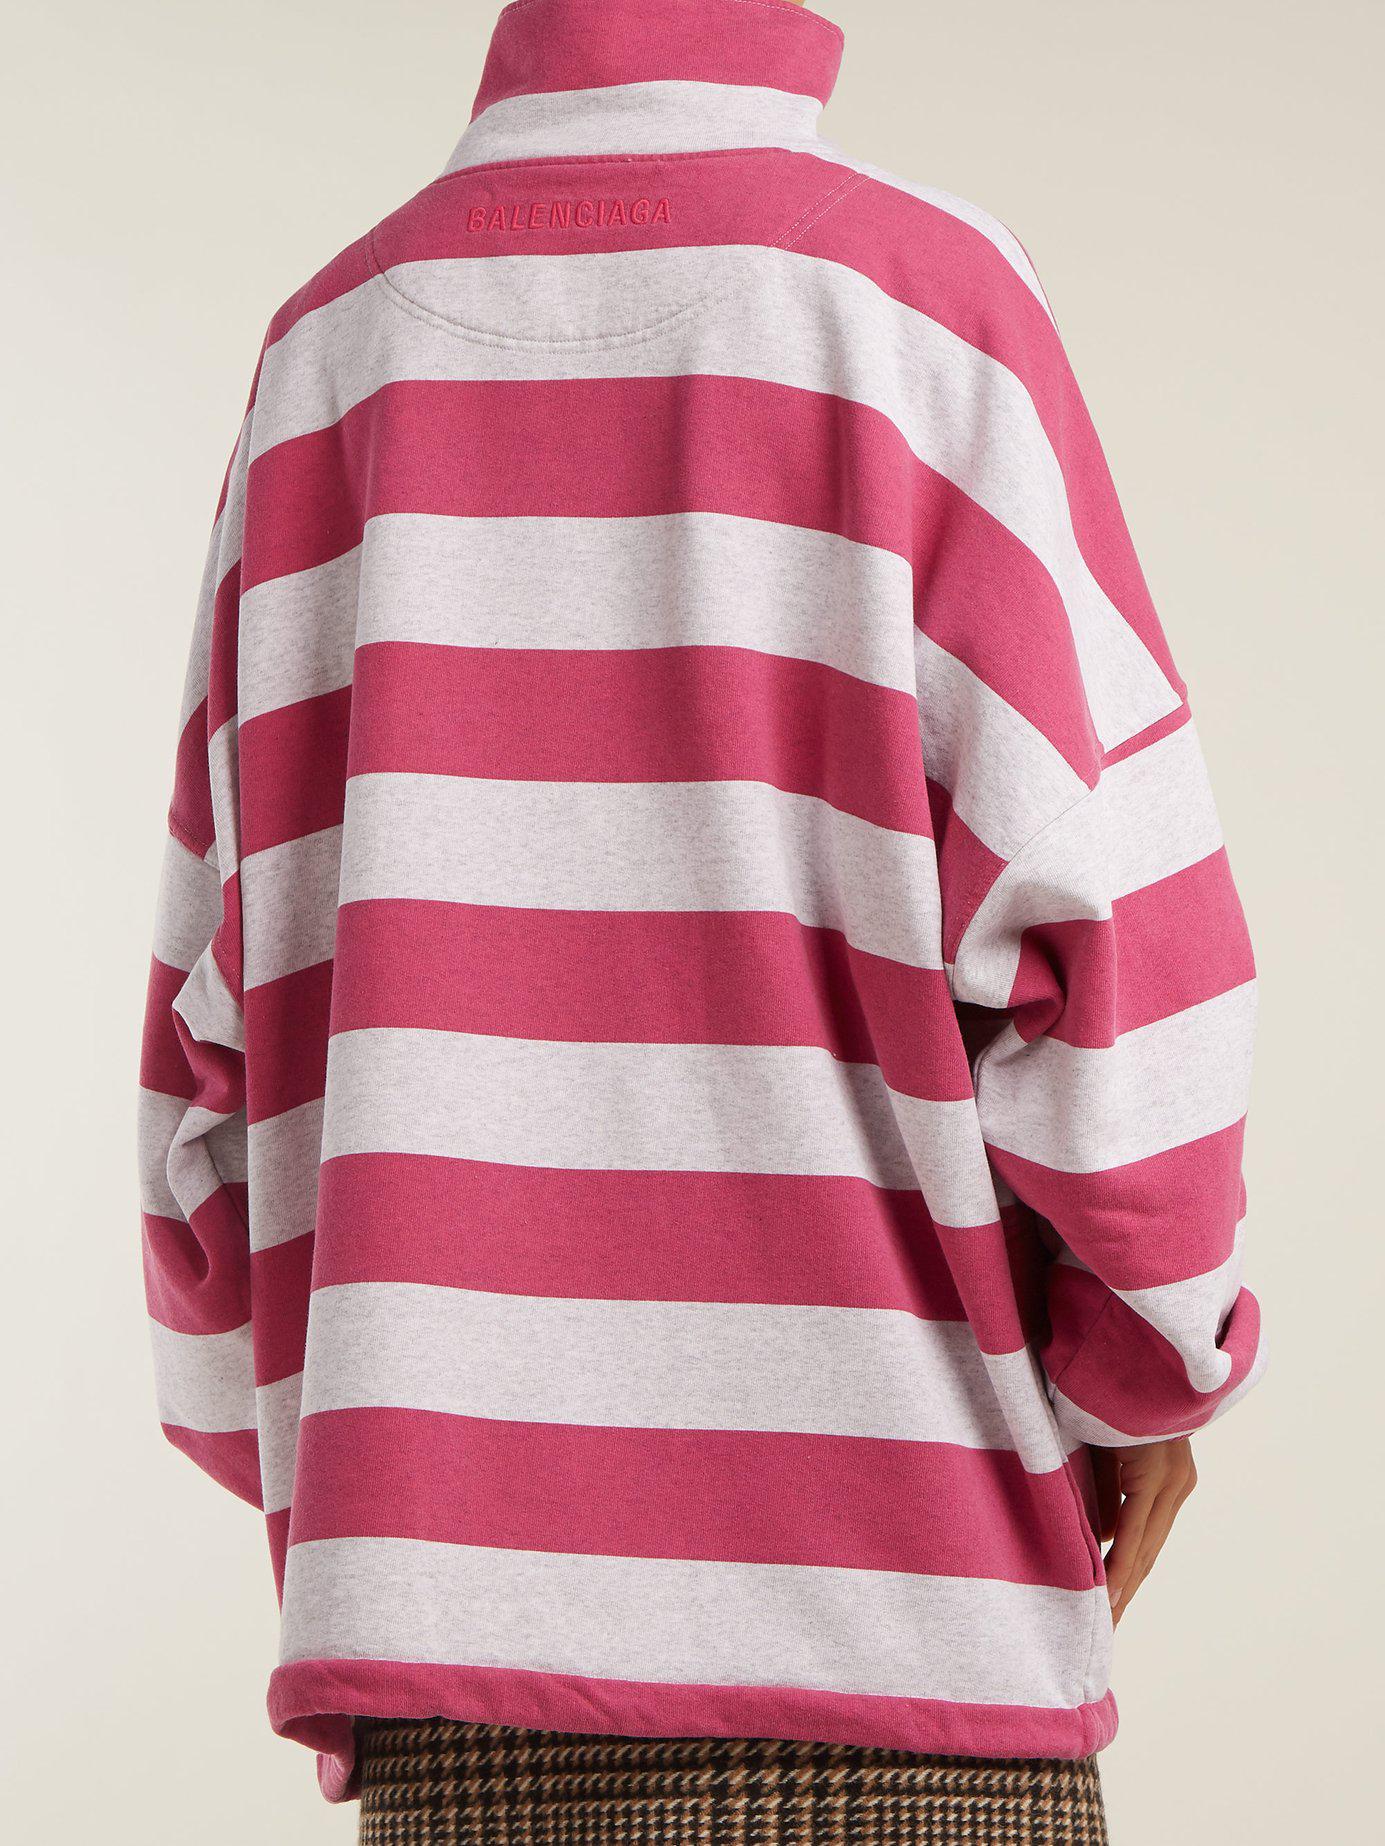 Balenciaga Striped Cotton-blend Top in Pink - Lyst